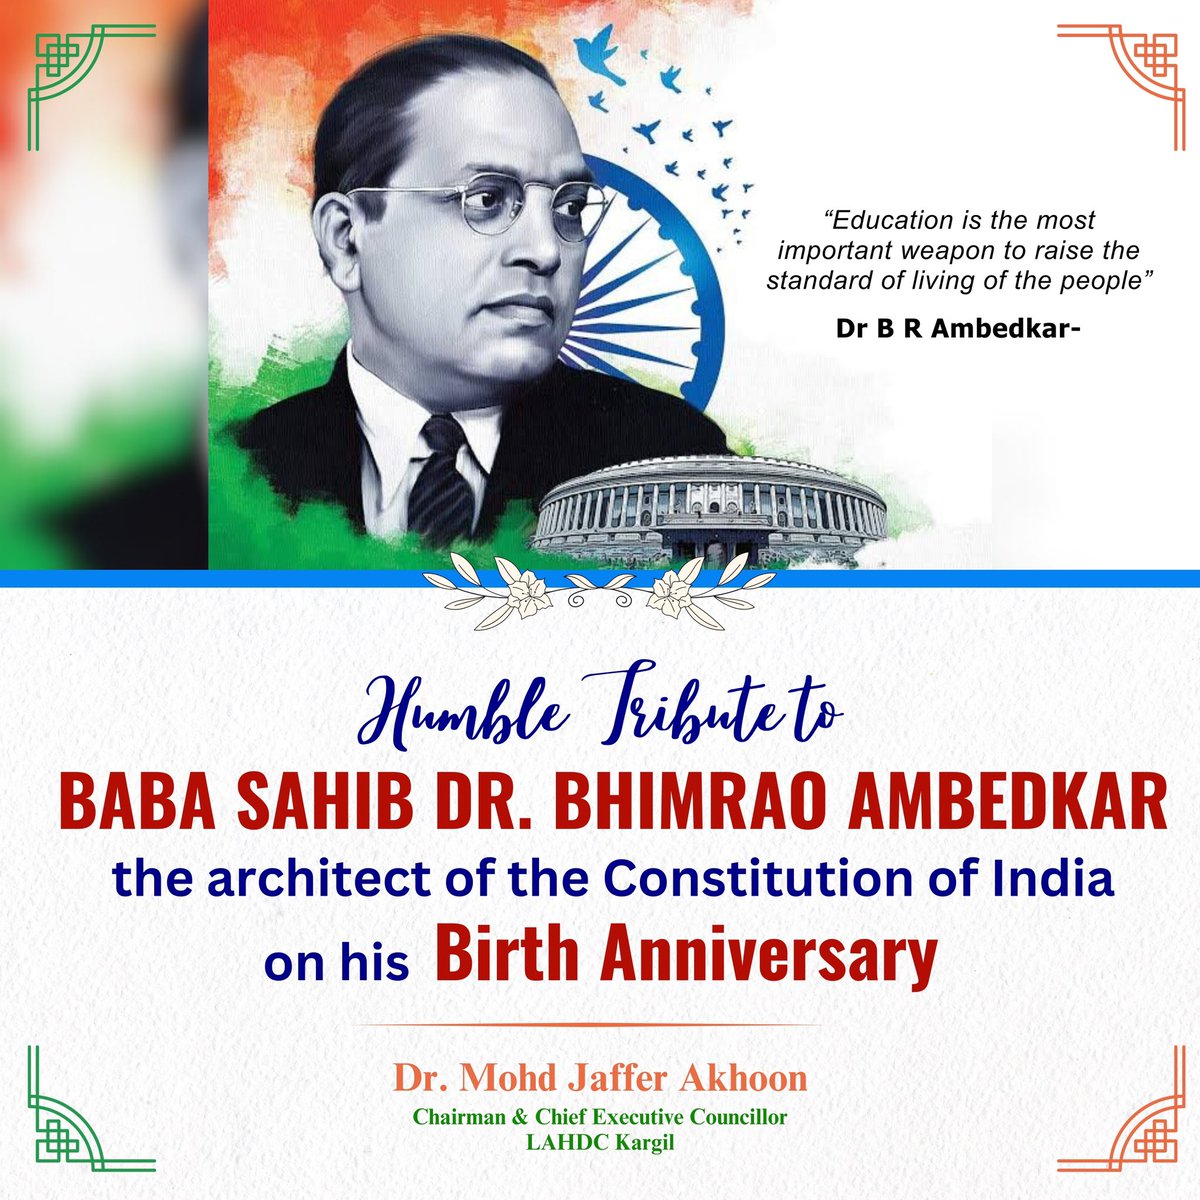 Tributes to Baba Sahib Dr. Bhim Rao Ambedkar on his Birth Anniversary. We all cherish his vision and plularity for providing us with the equal opportunities through the great Constitution of India. #AmbedkarJayanti2024 #Ambedkar